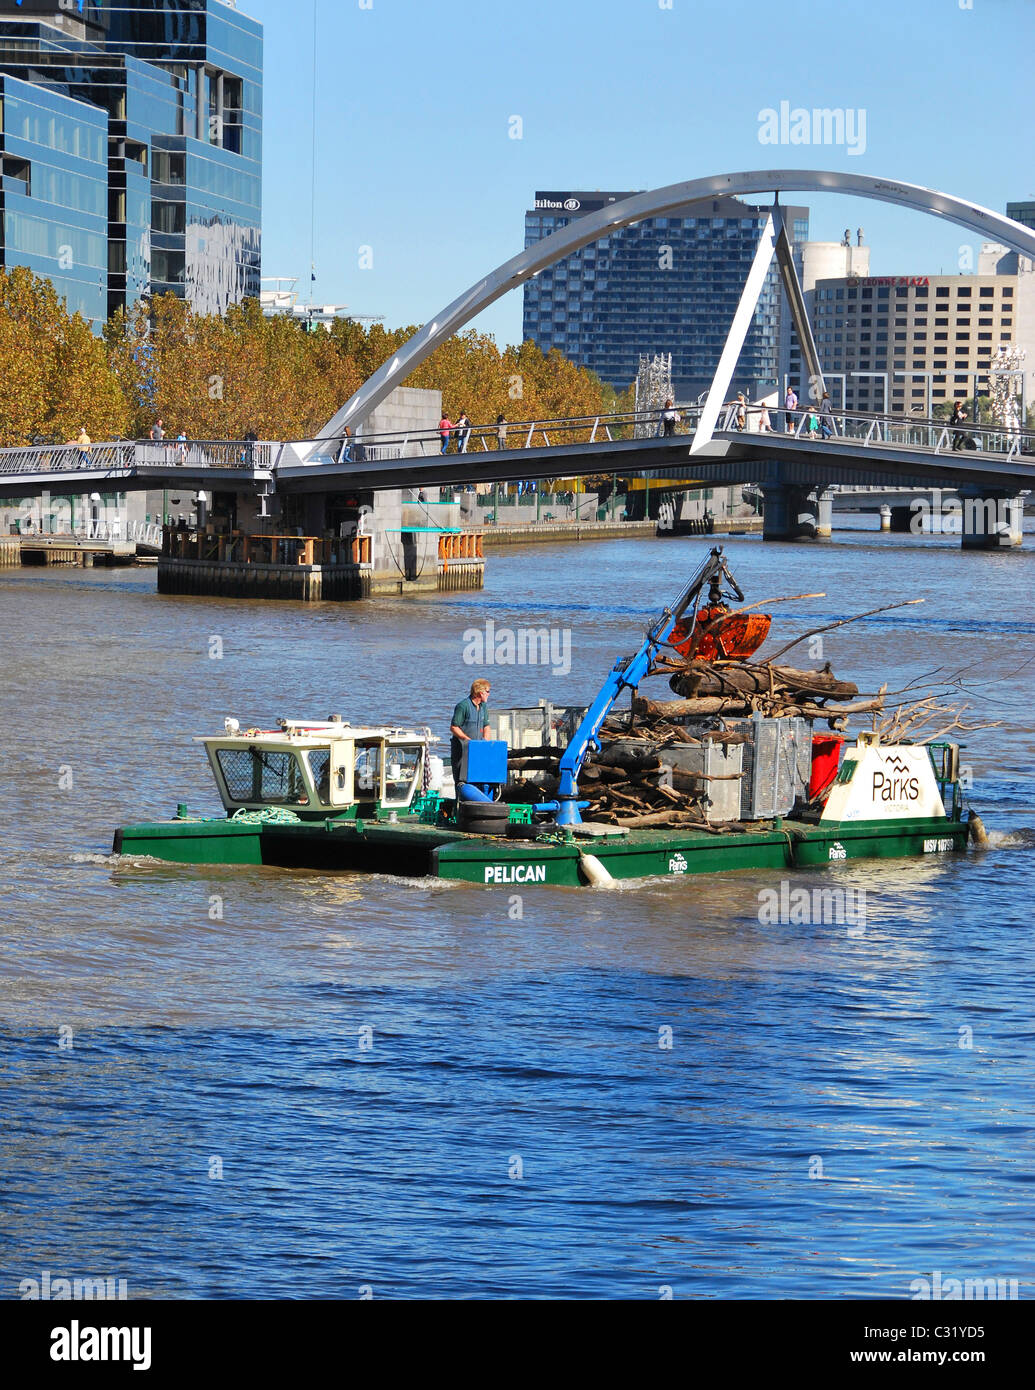 Melbourne Parks Dept collecting Yarra River rubbish by crane and barge, central Melbourne city, Victoria, Australia Stock Photo